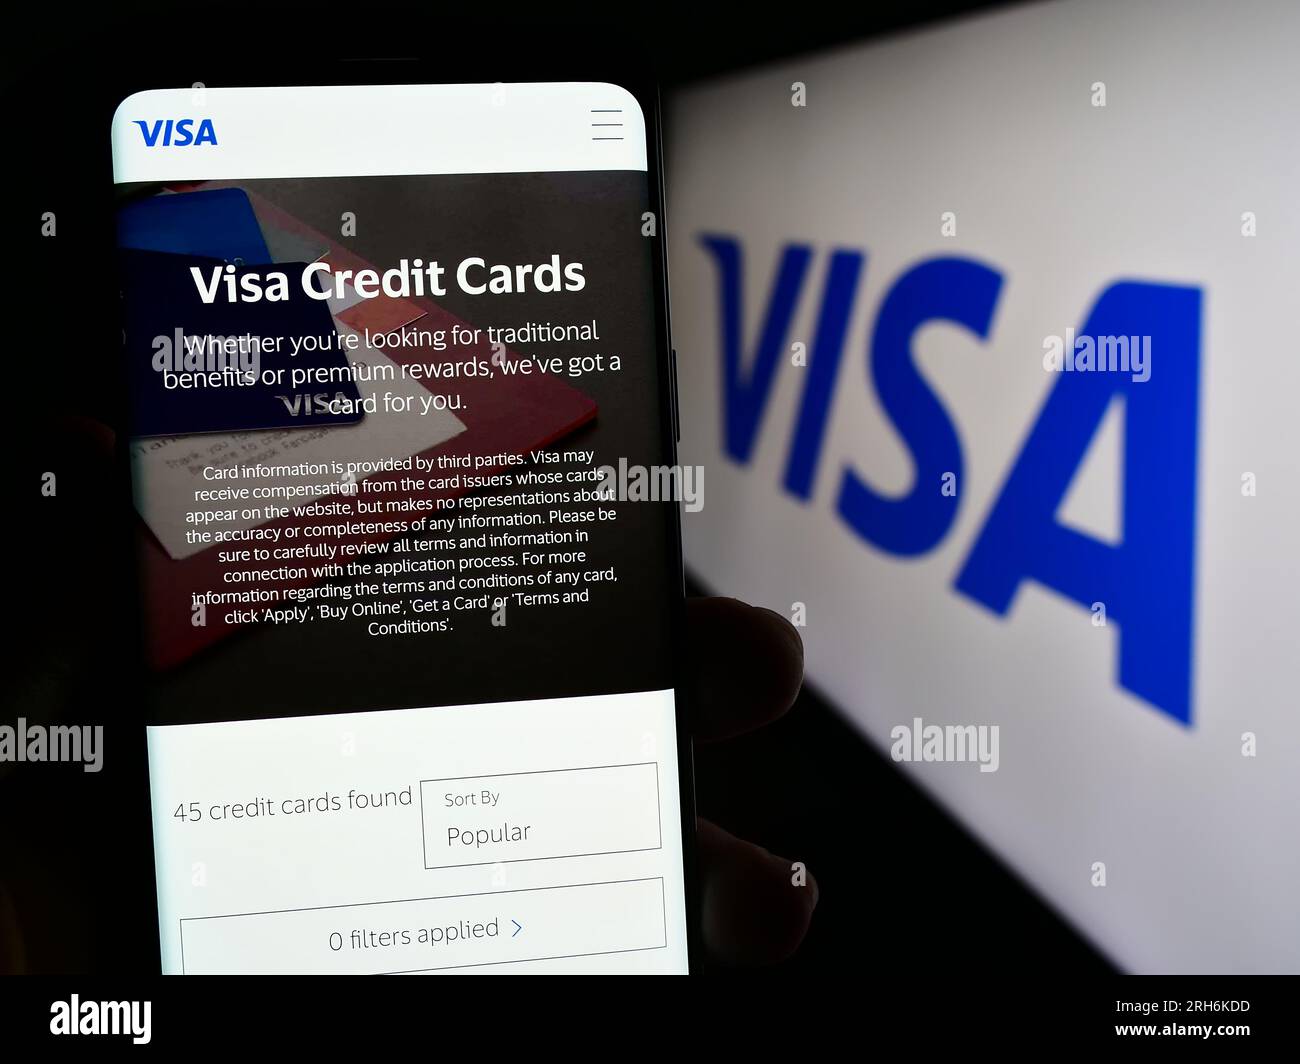 Person holding mobile phone with web page of US payment processing company Visa Inc. on screen in front of logo. Focus on center of phone display. Stock Photo